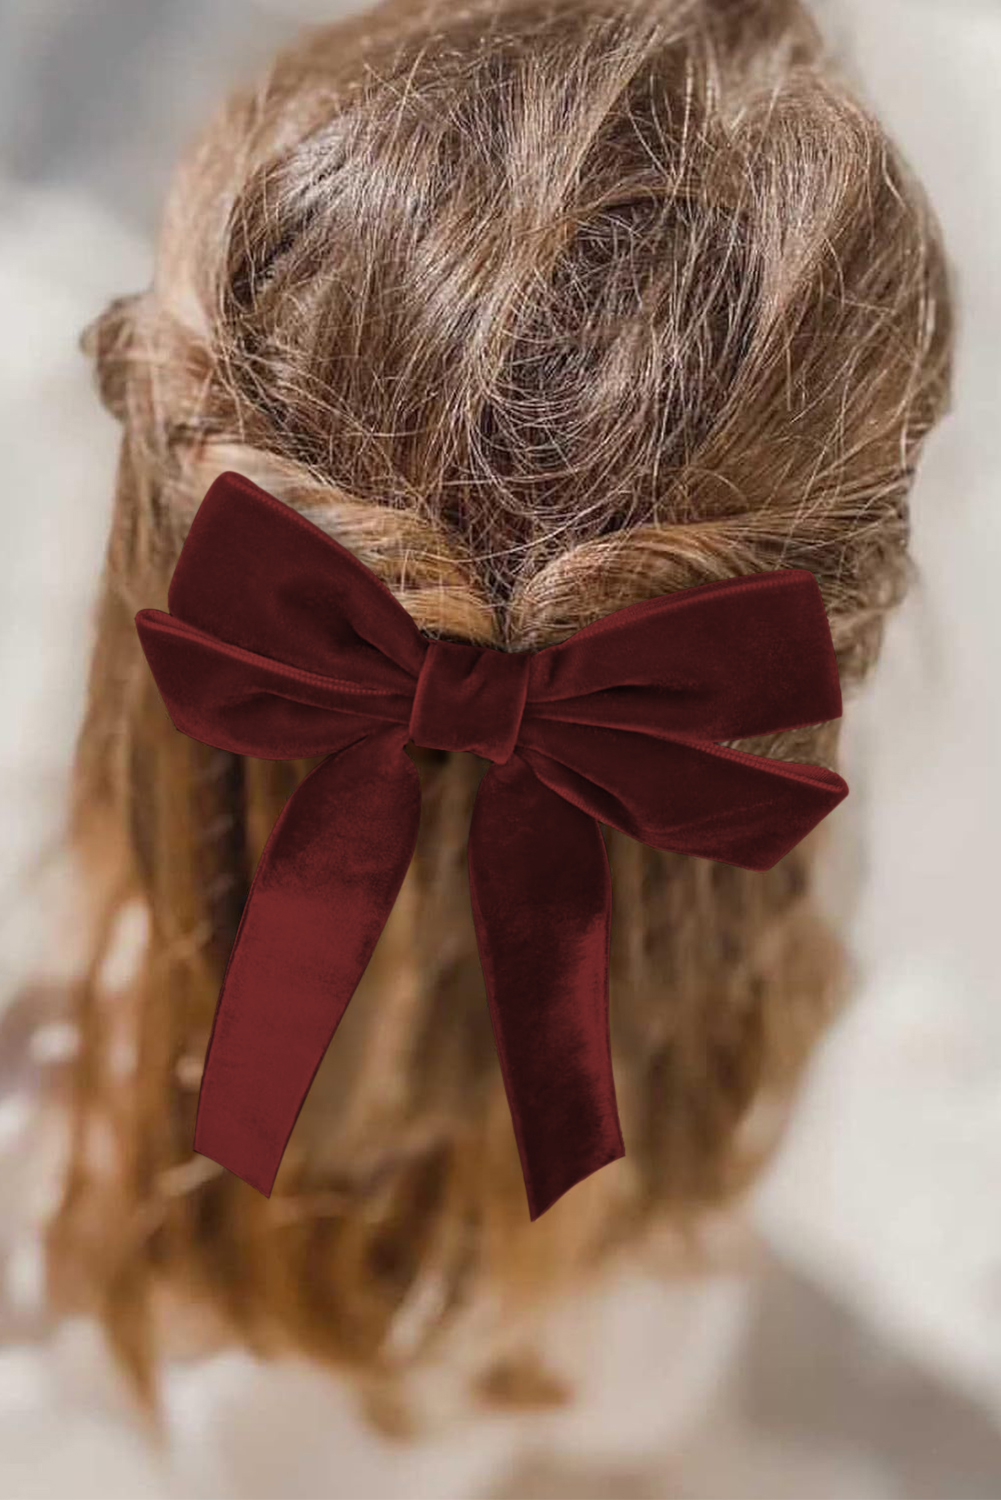  Red Sandalwood Solid Color Velvet Bowknot Frenchy HAIR Clip